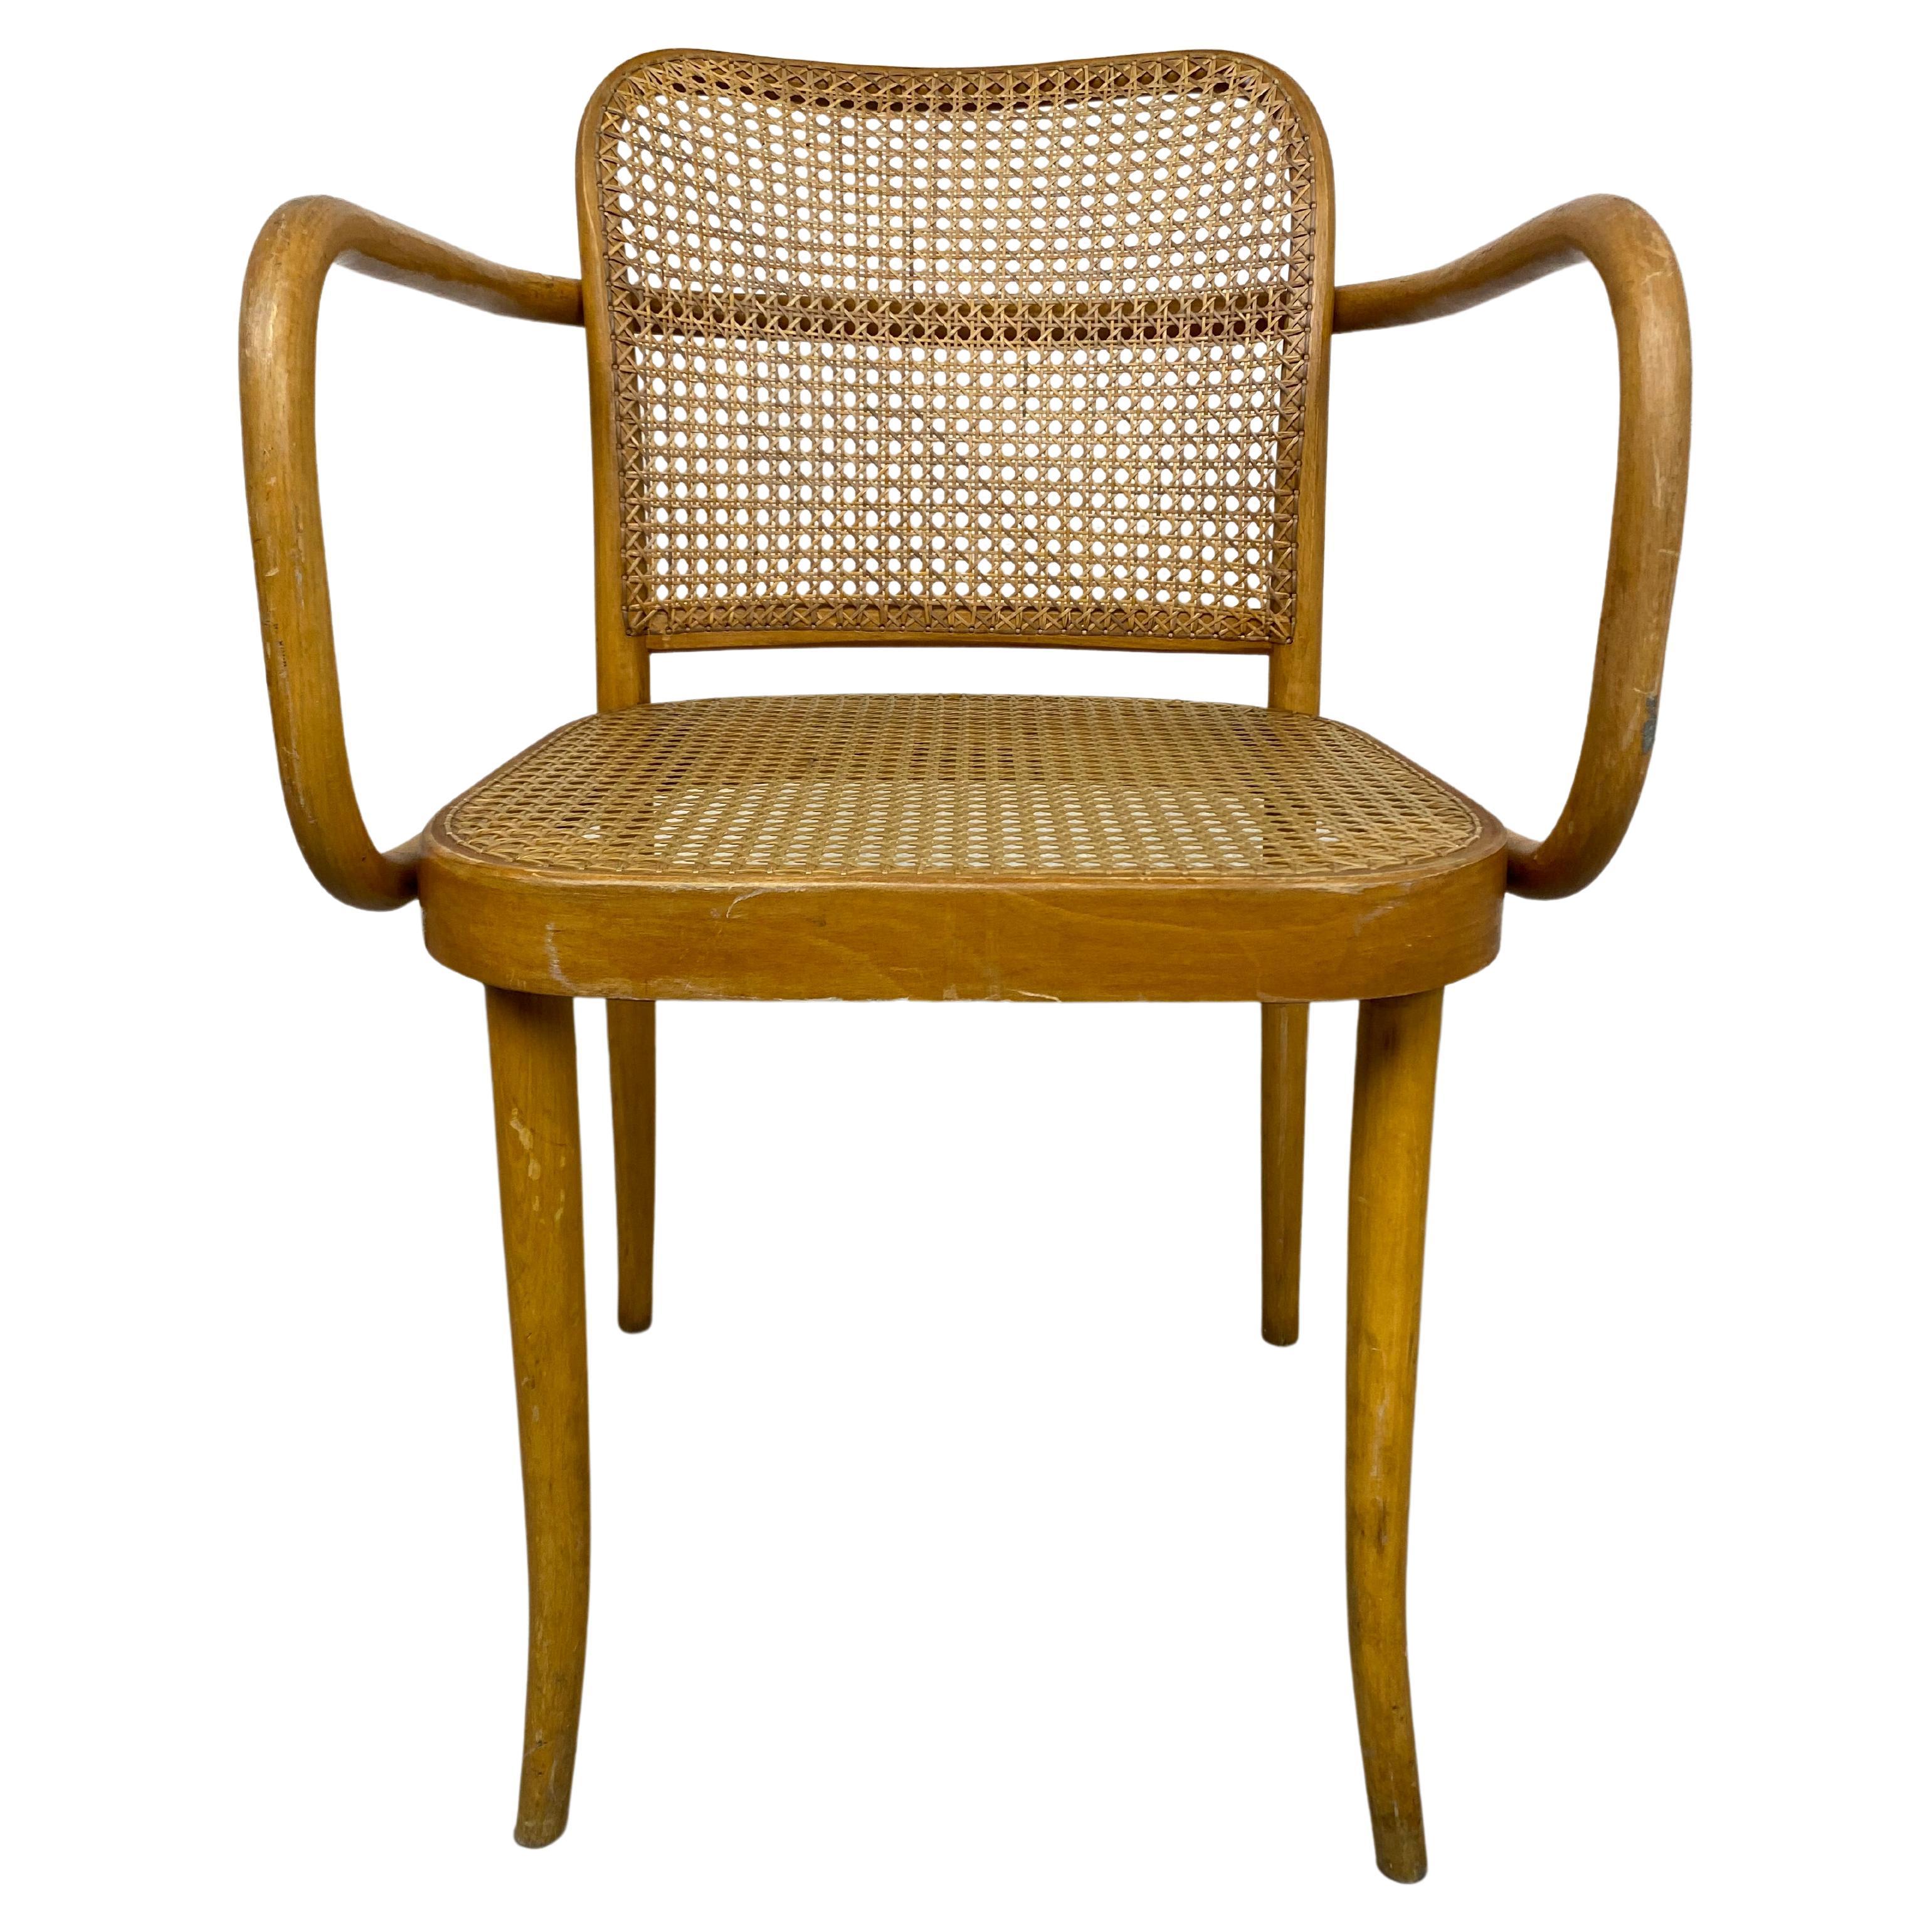 Office chair no.811 by Josef Hoffmann for Thonet